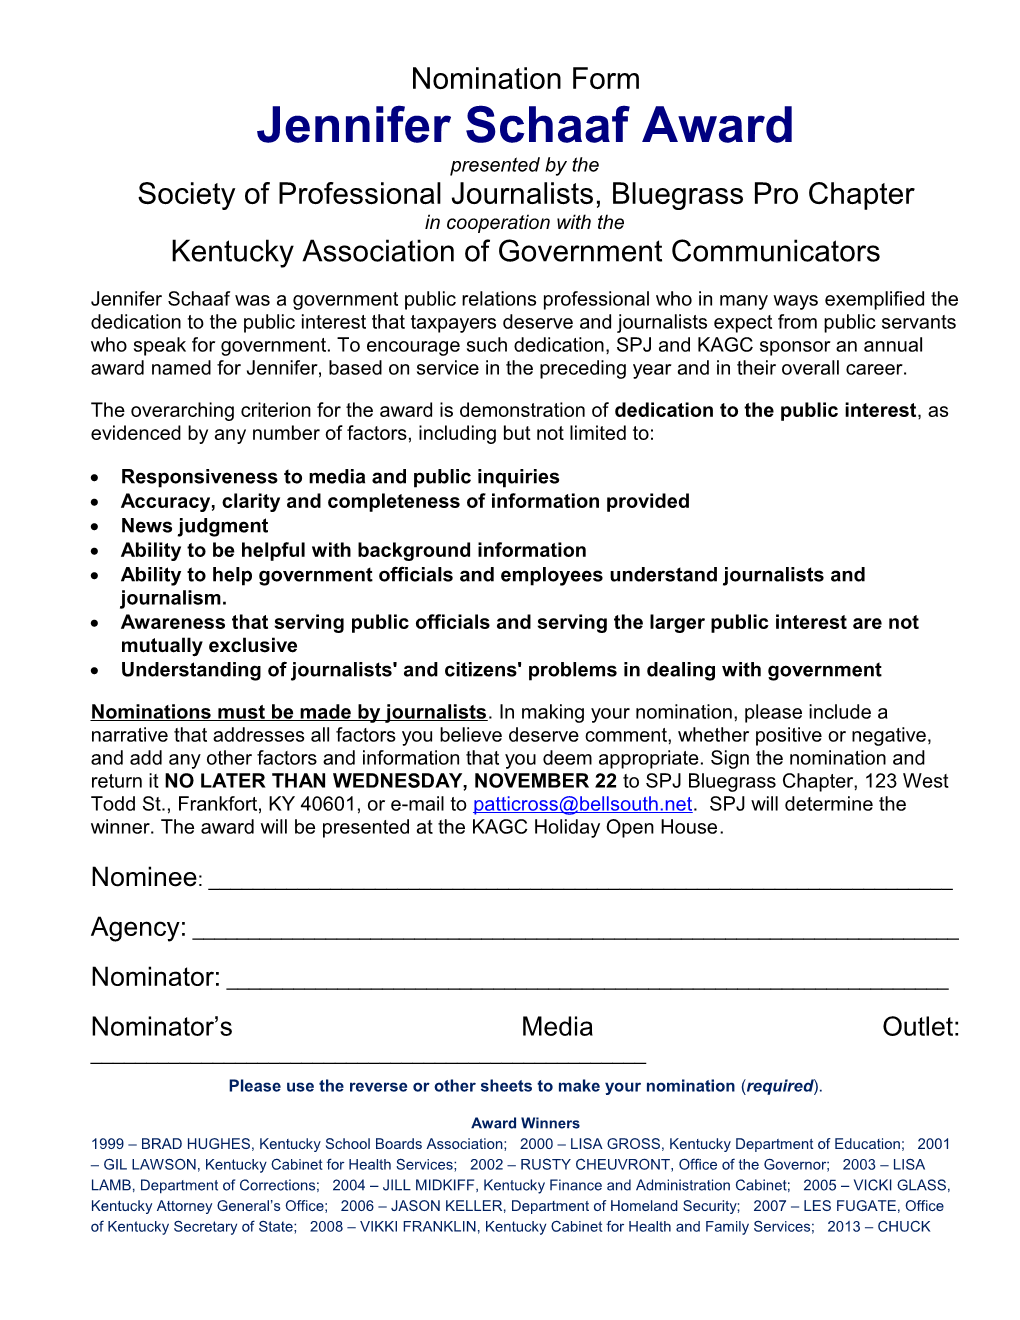 Society of Professional Journalists, Bluegrass Pro Chapter